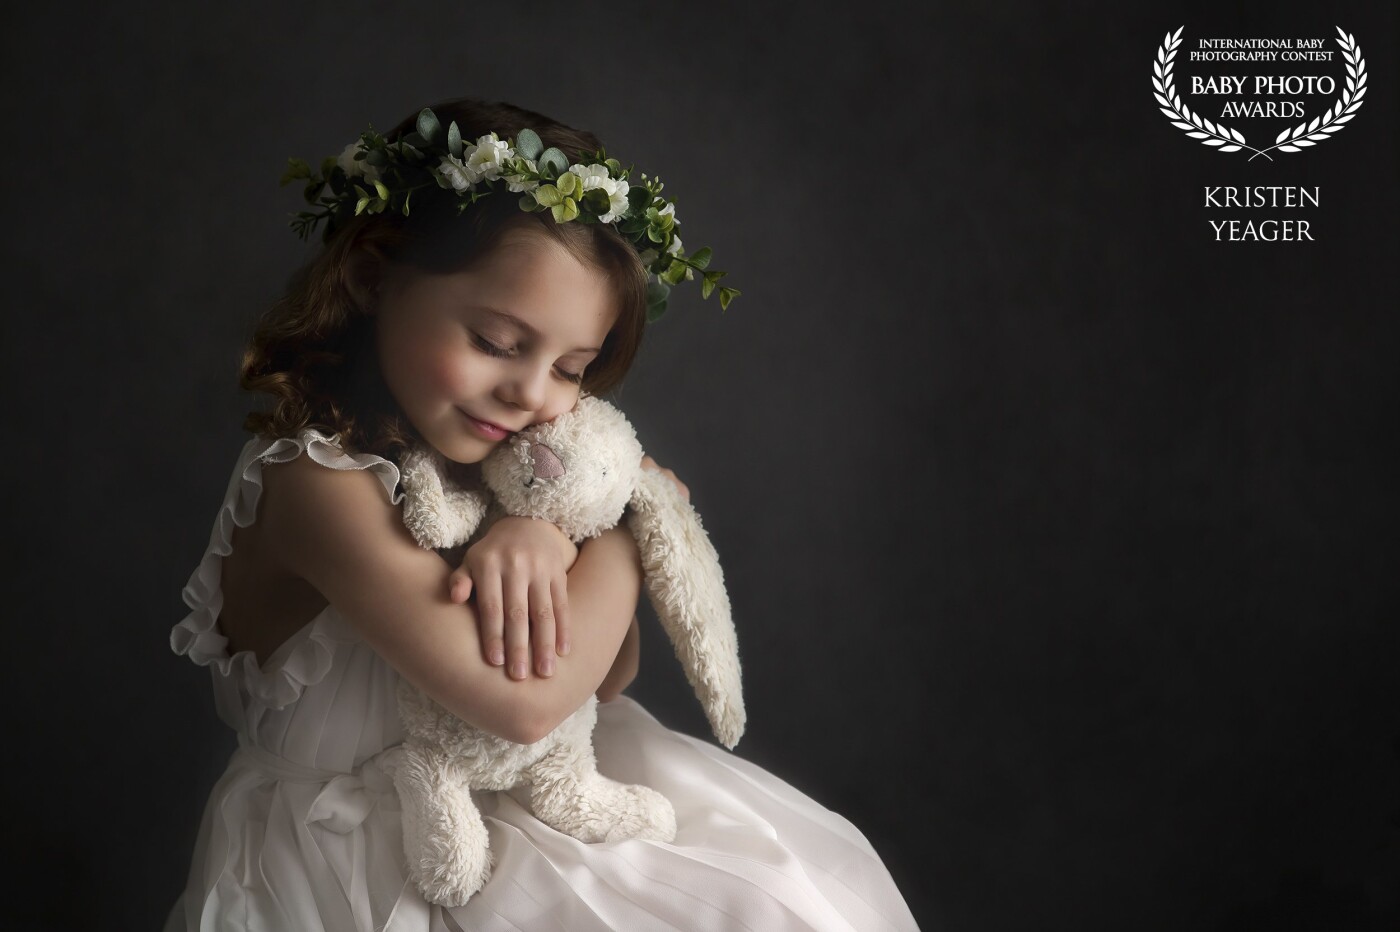 This is my daughter Lila and the rabbit she got for her very first Easter. As you can tell, the bunny is well-loved and this picture truly displays the innocence and love of childhood. It reminds me of our of our favorite stories, The Velveteen Rabbit.